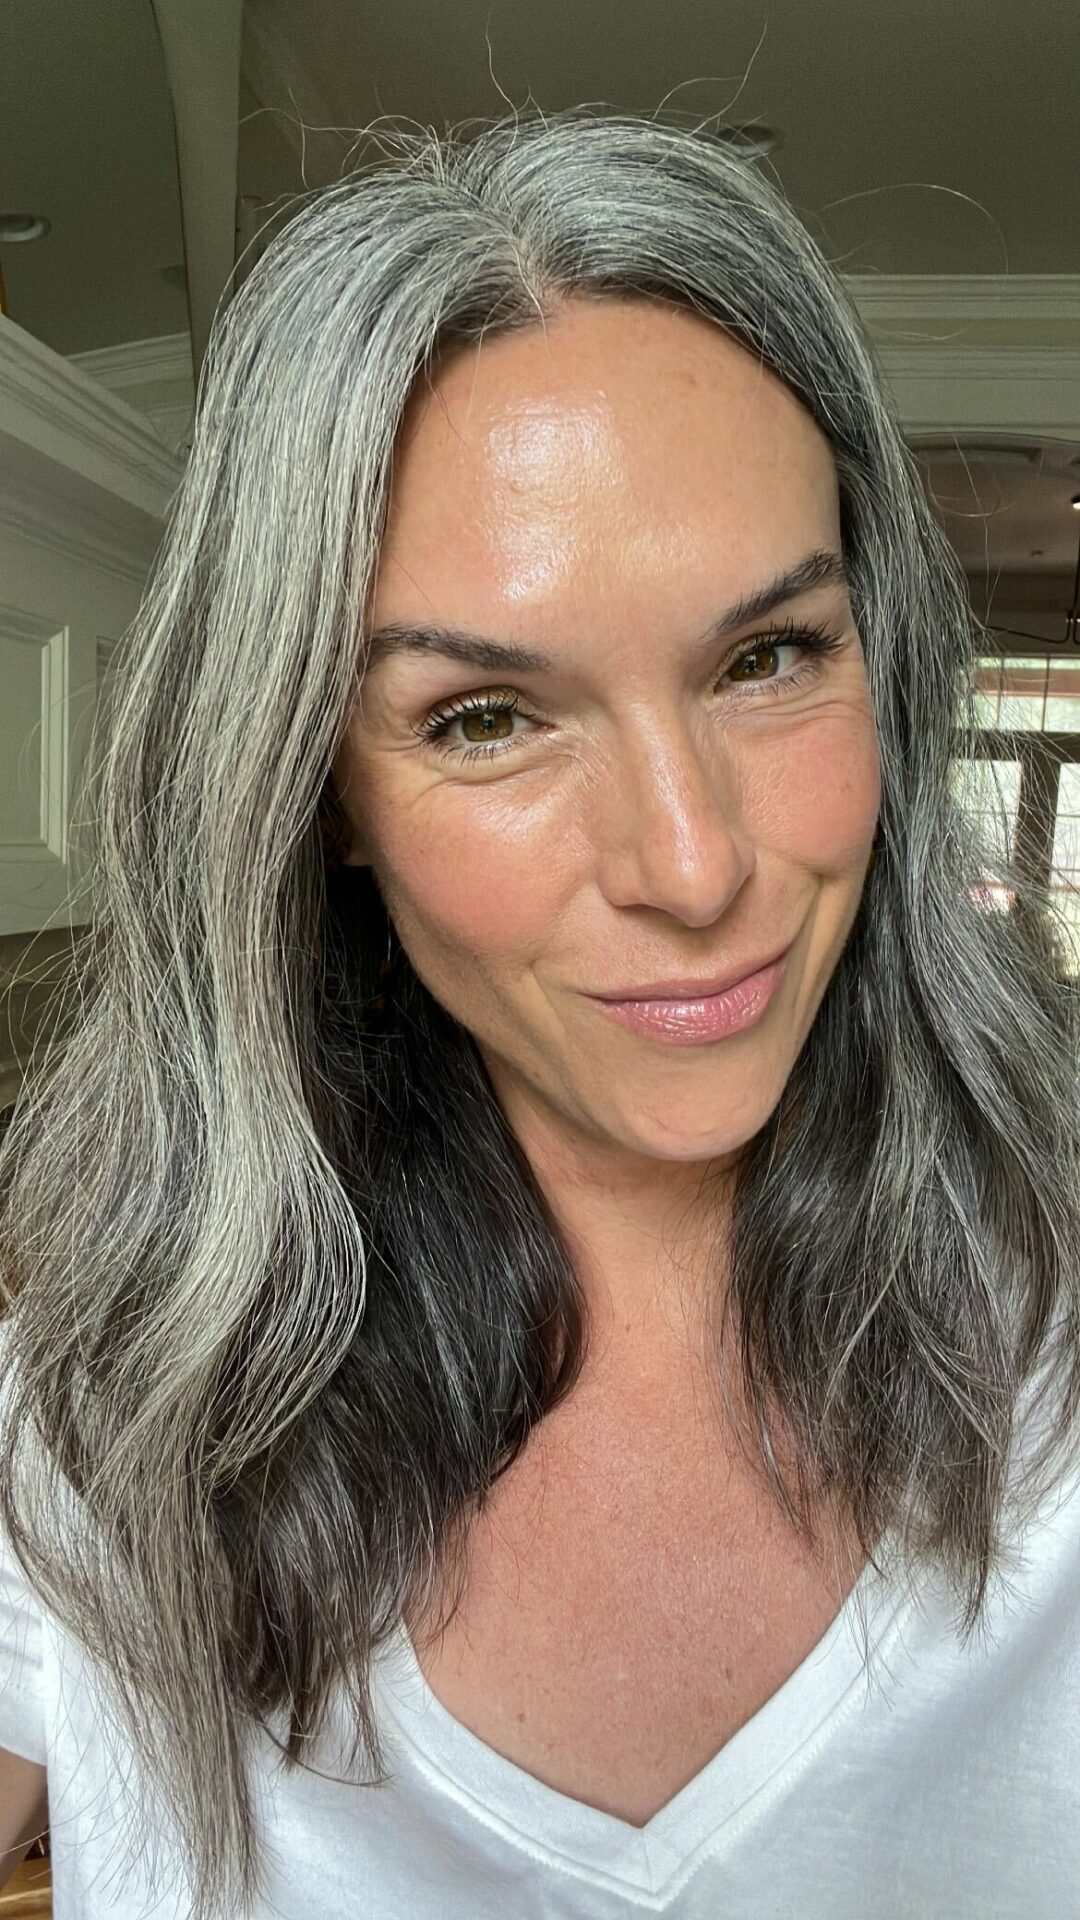 Over 40? Best Organic Foundations & BB Creams | The New Knew